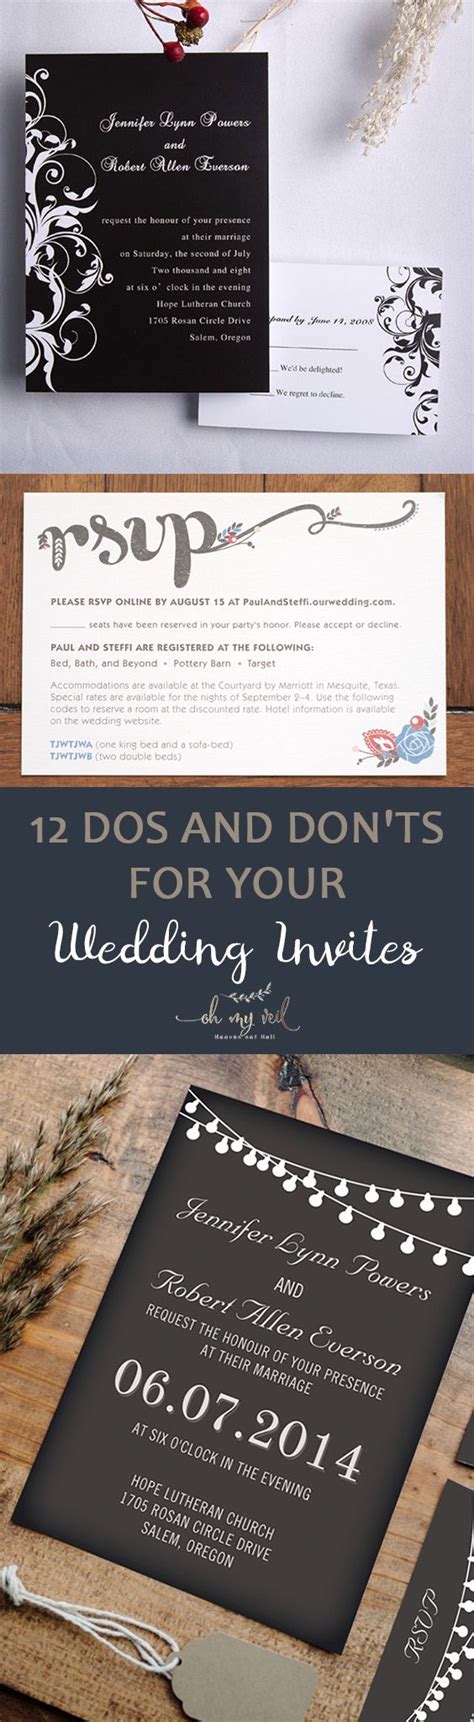 12 Dos And Donts For Your Wedding Invites Wedding Invitations